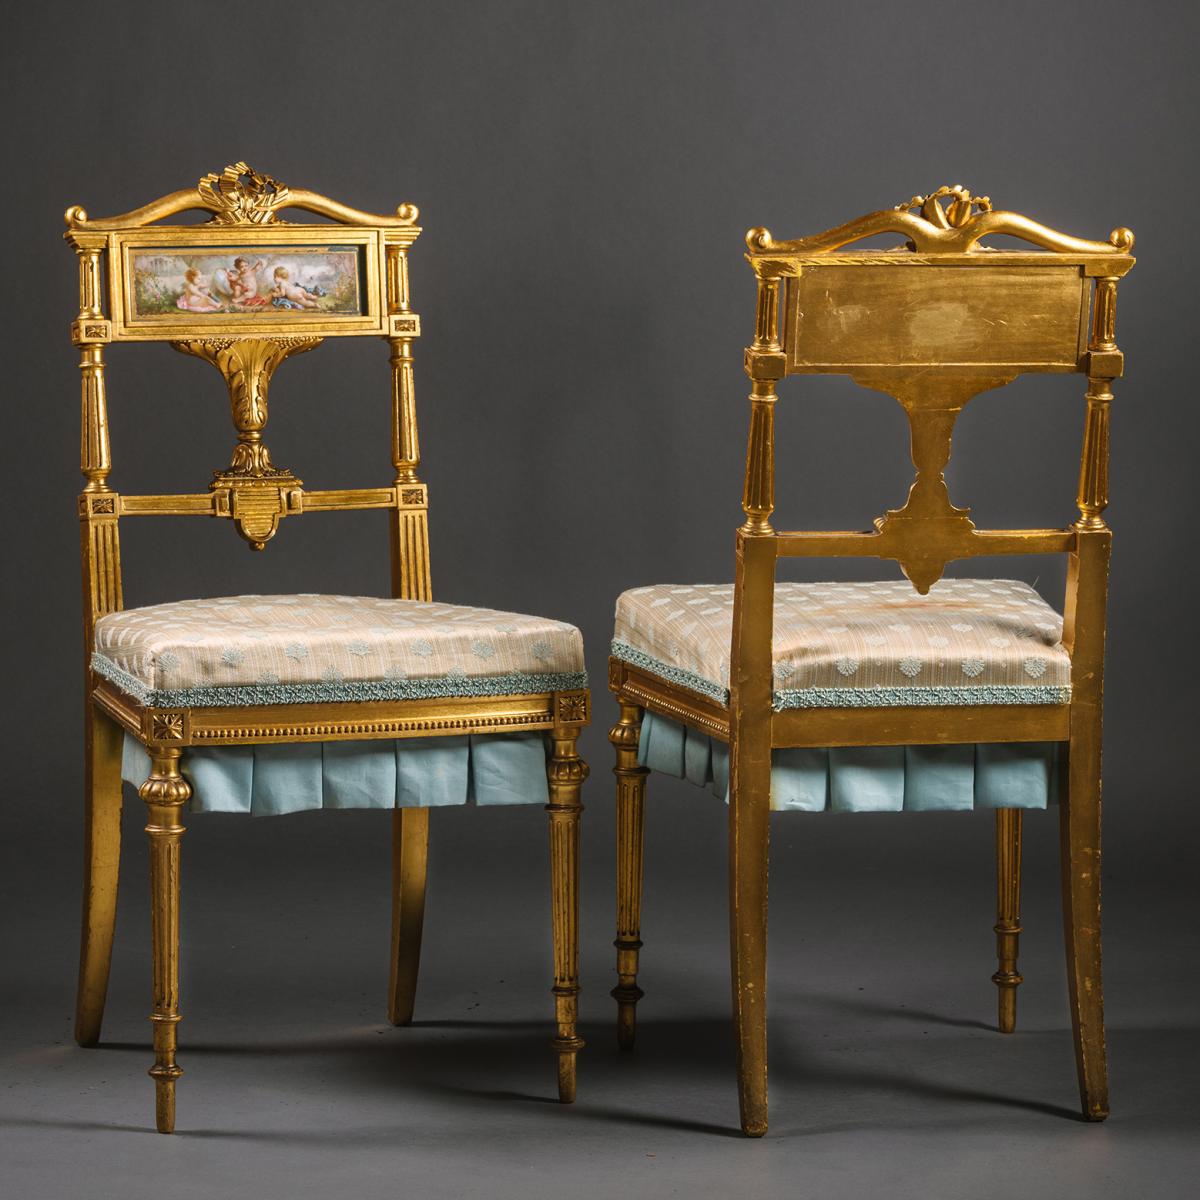 Sèvres-Style Porcelain Mounted Salon or Bedroom Chairs